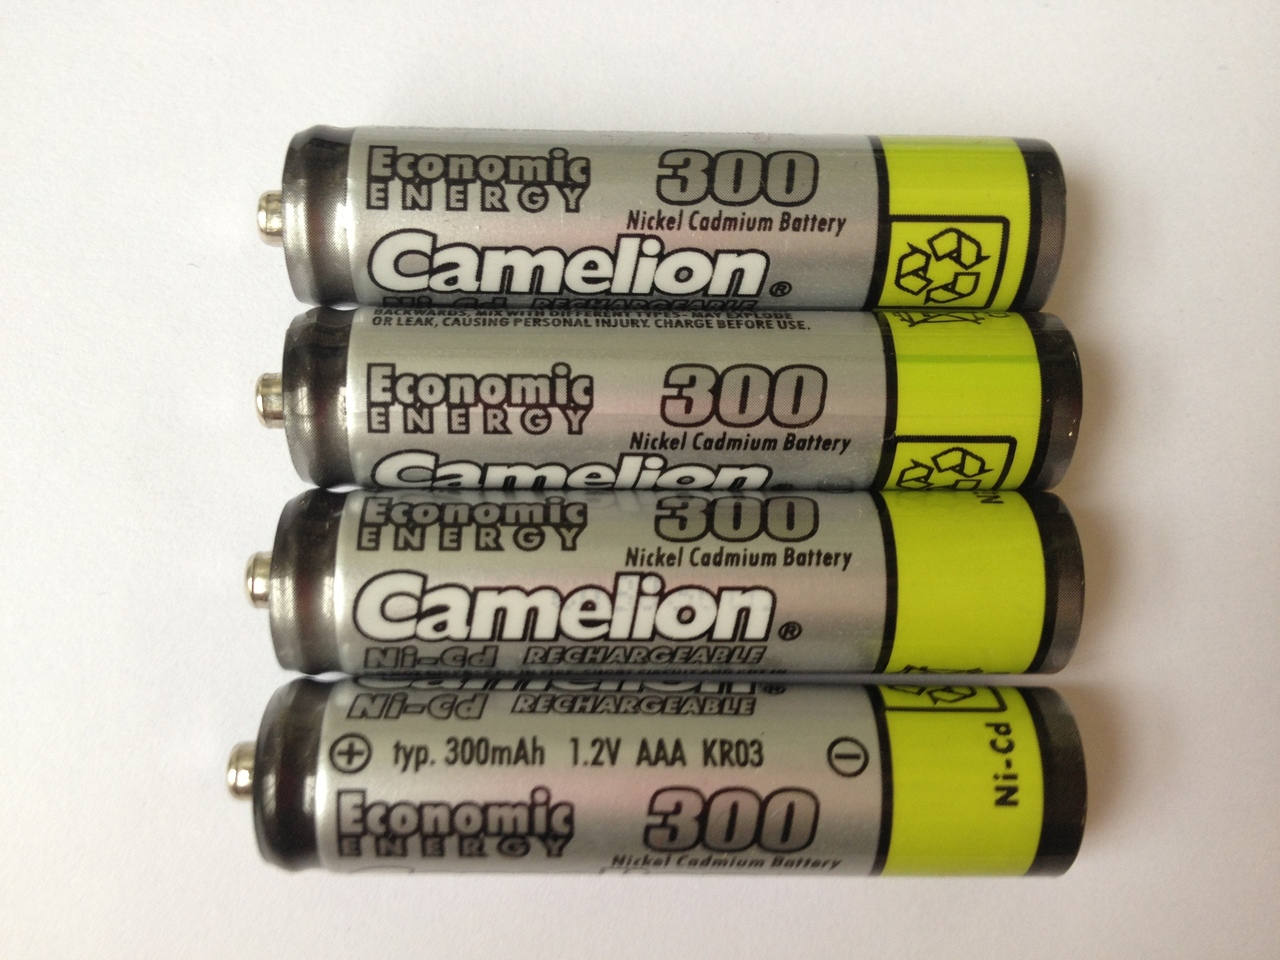 Camelion AAA Rechargeable NiCD Batteries 300mAH 4 Pack + FREE SHIPPING!